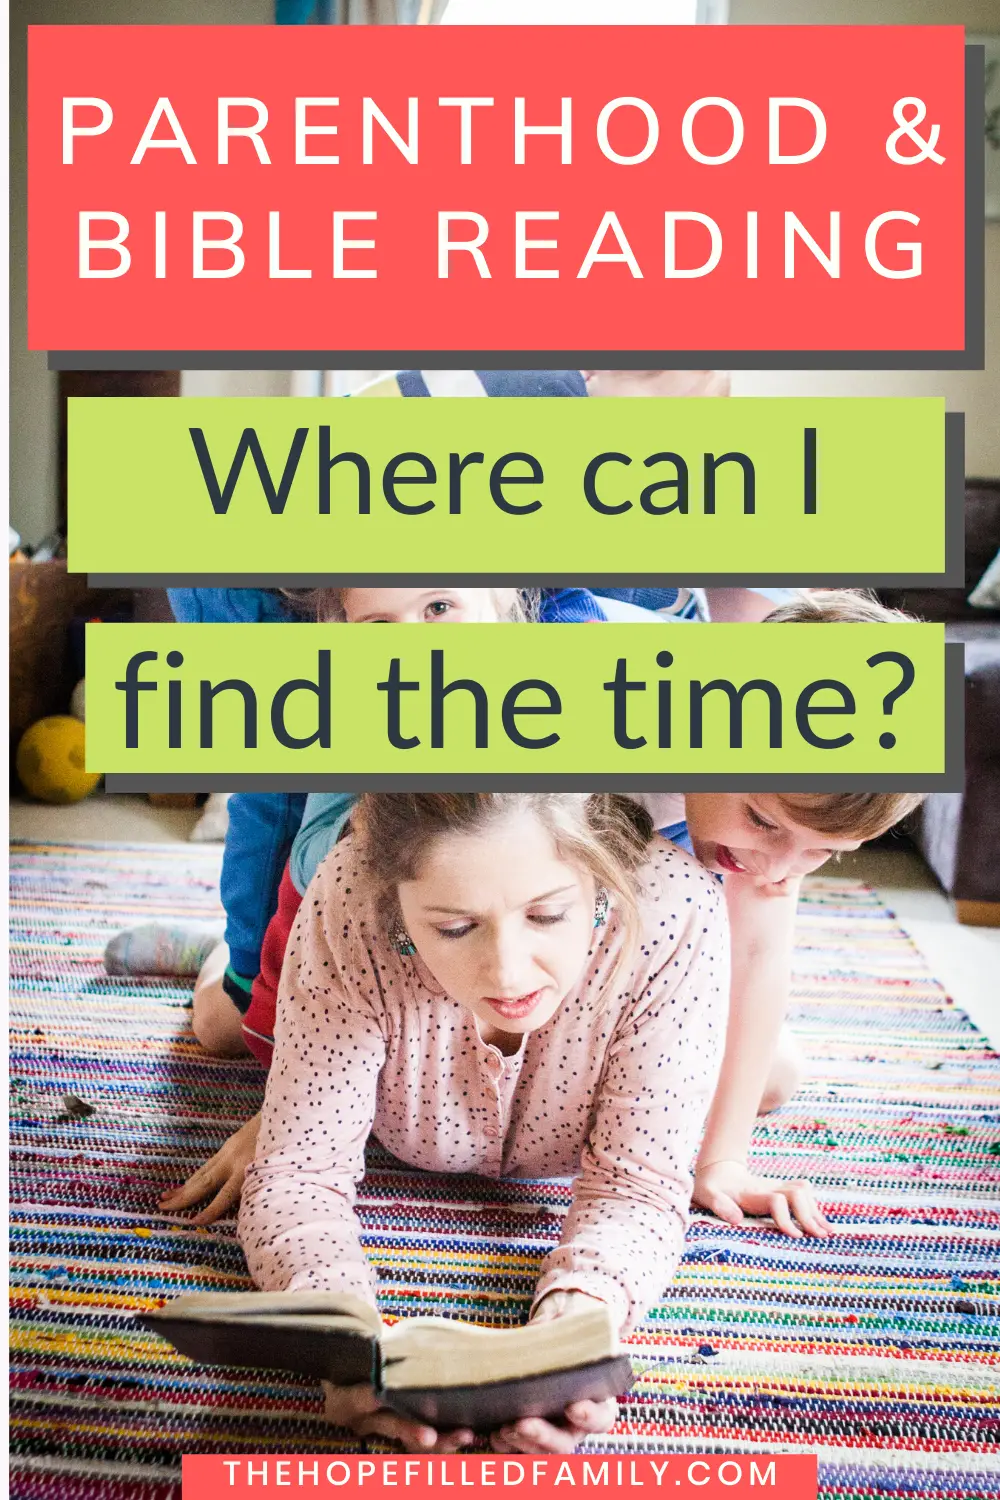 How does a busy, tired parent make time to read the Bible? The 'why' and 'how' are outlined in this article.